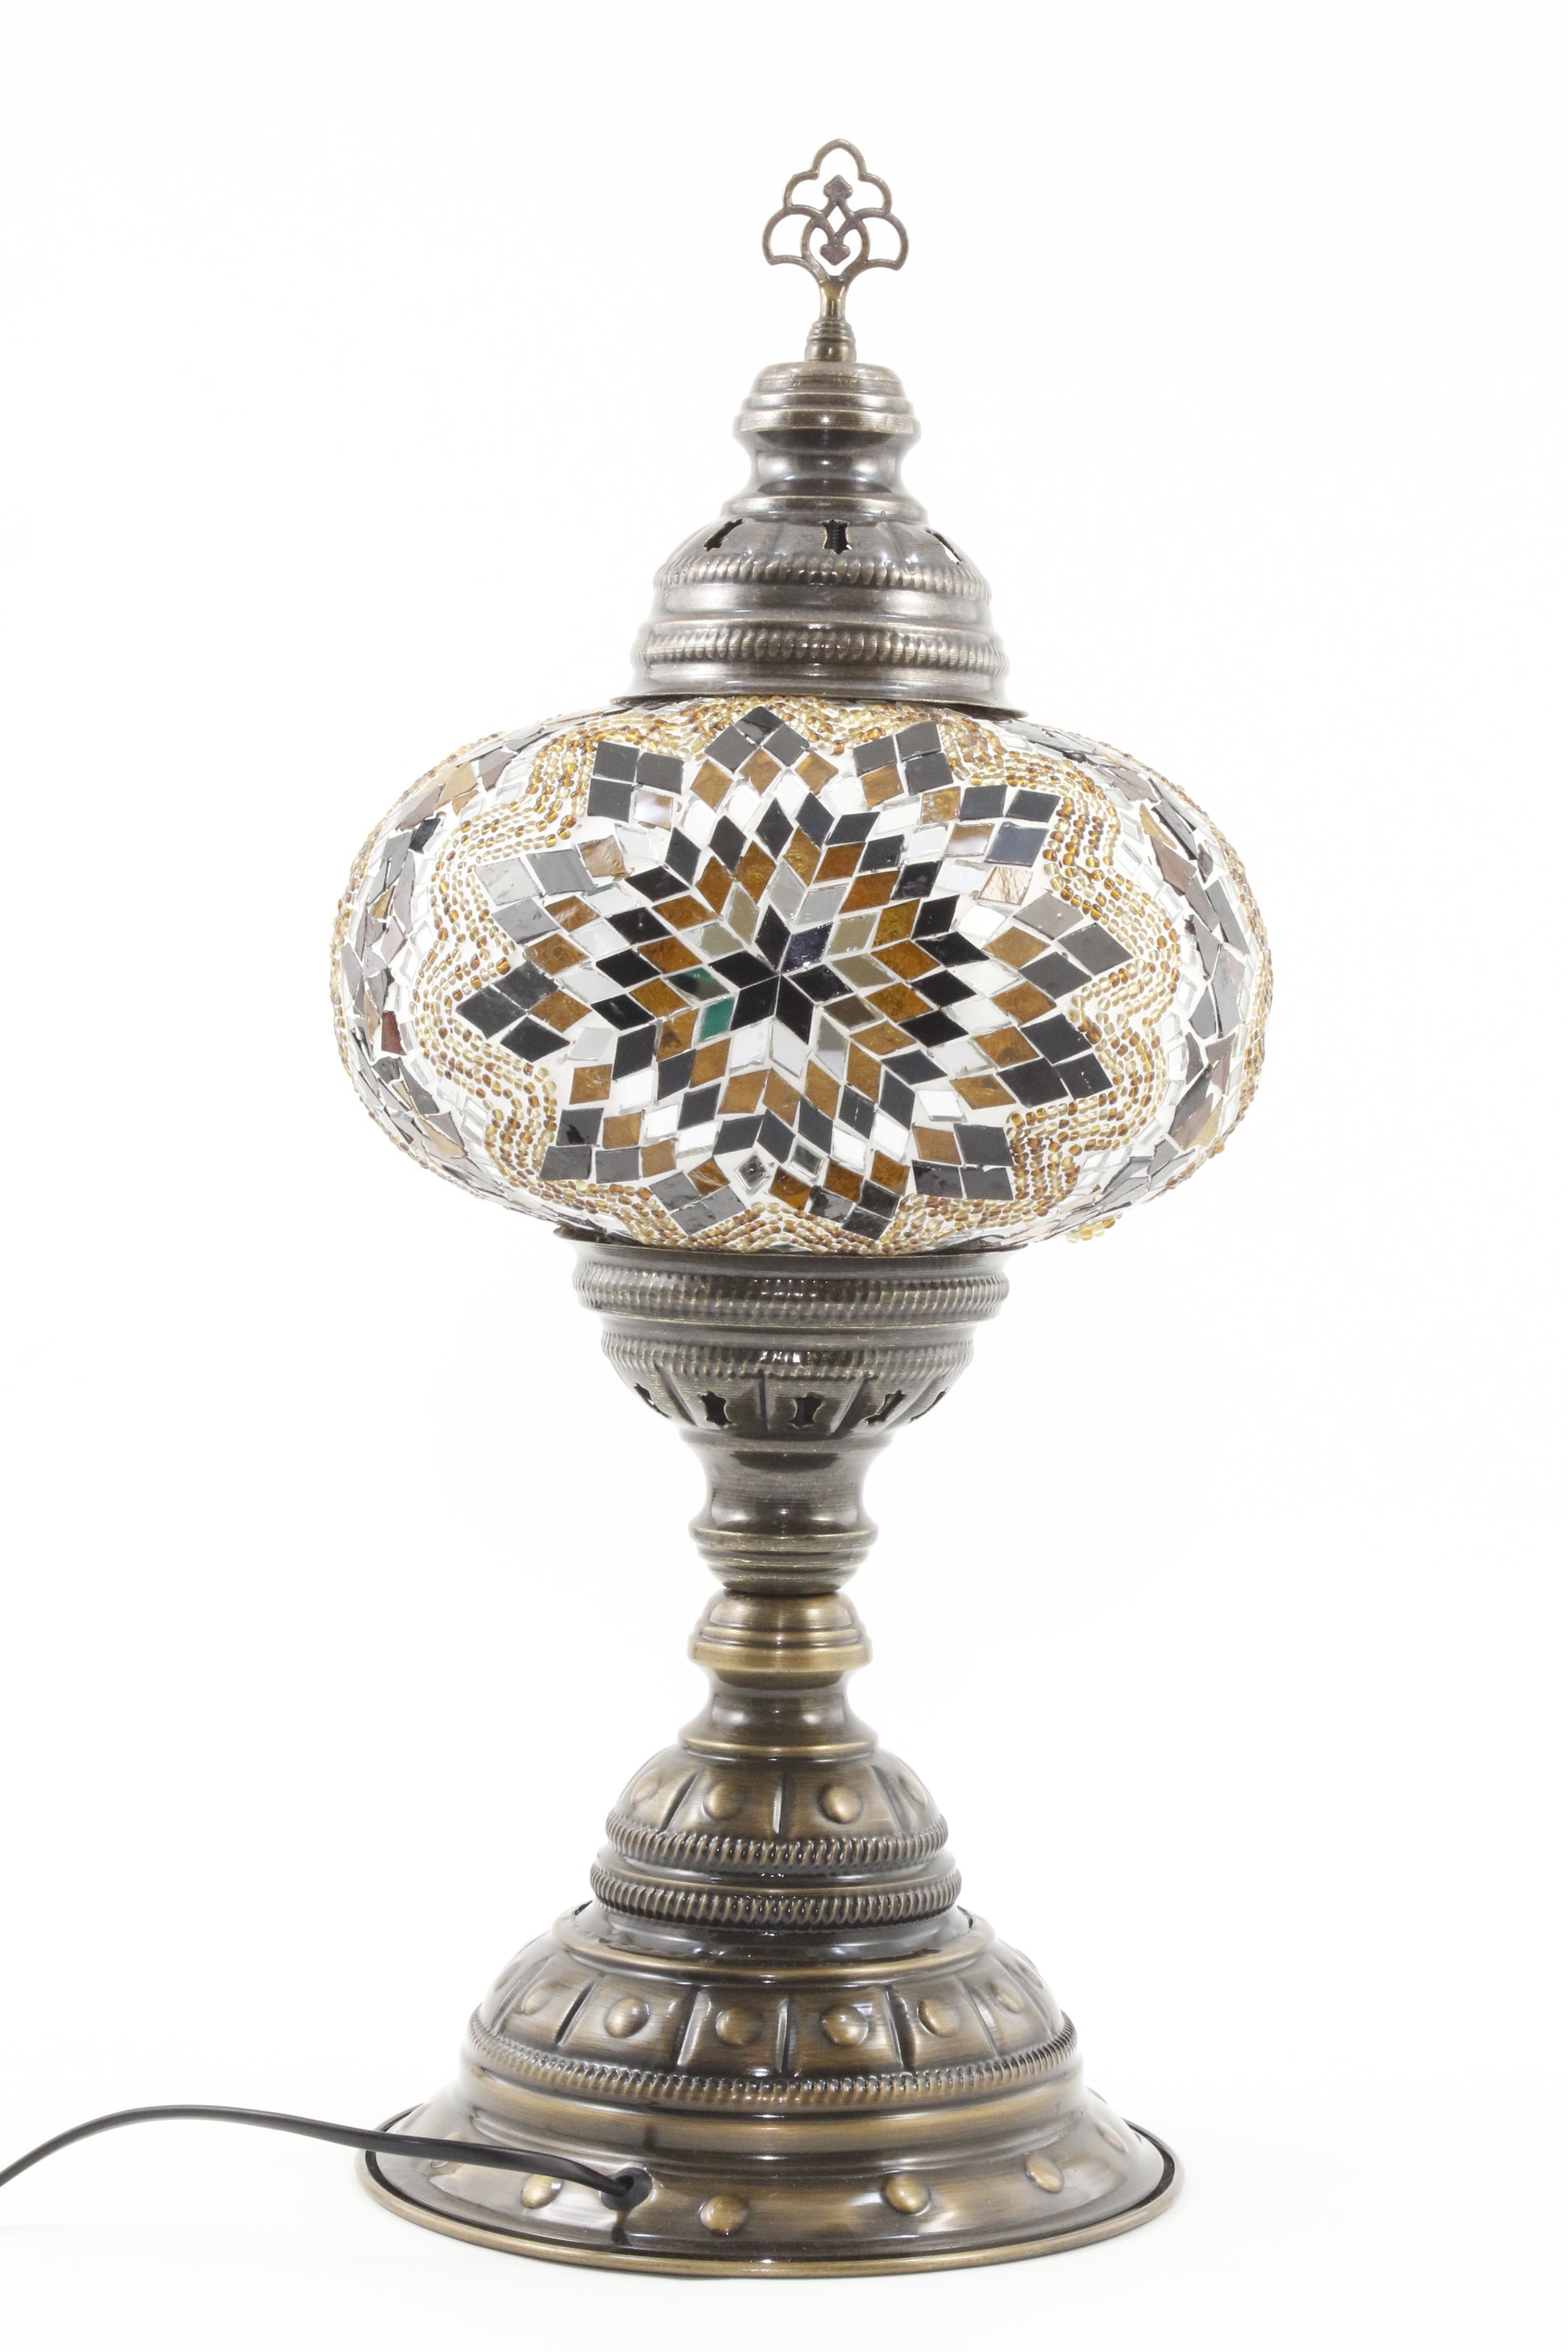 TURKISH MOSAIC TABLE LAMP MB4 AMBER-TURNED OFF